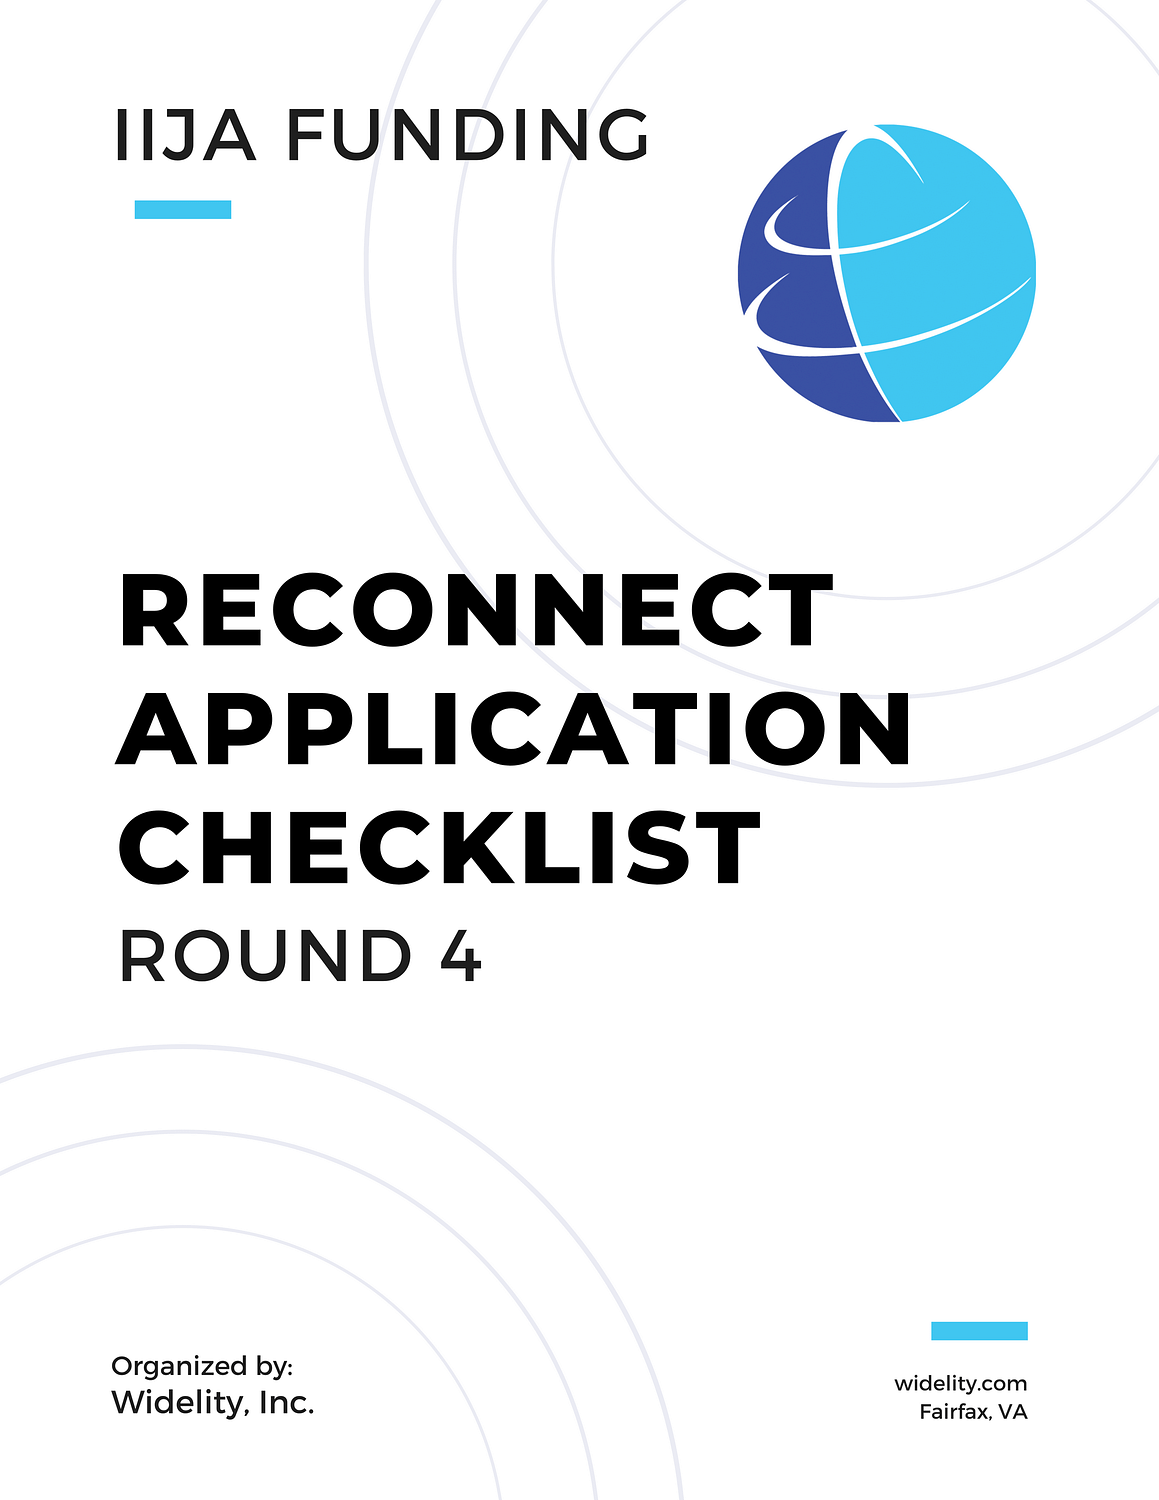 Reconnect application checklist information PDF: Click to download